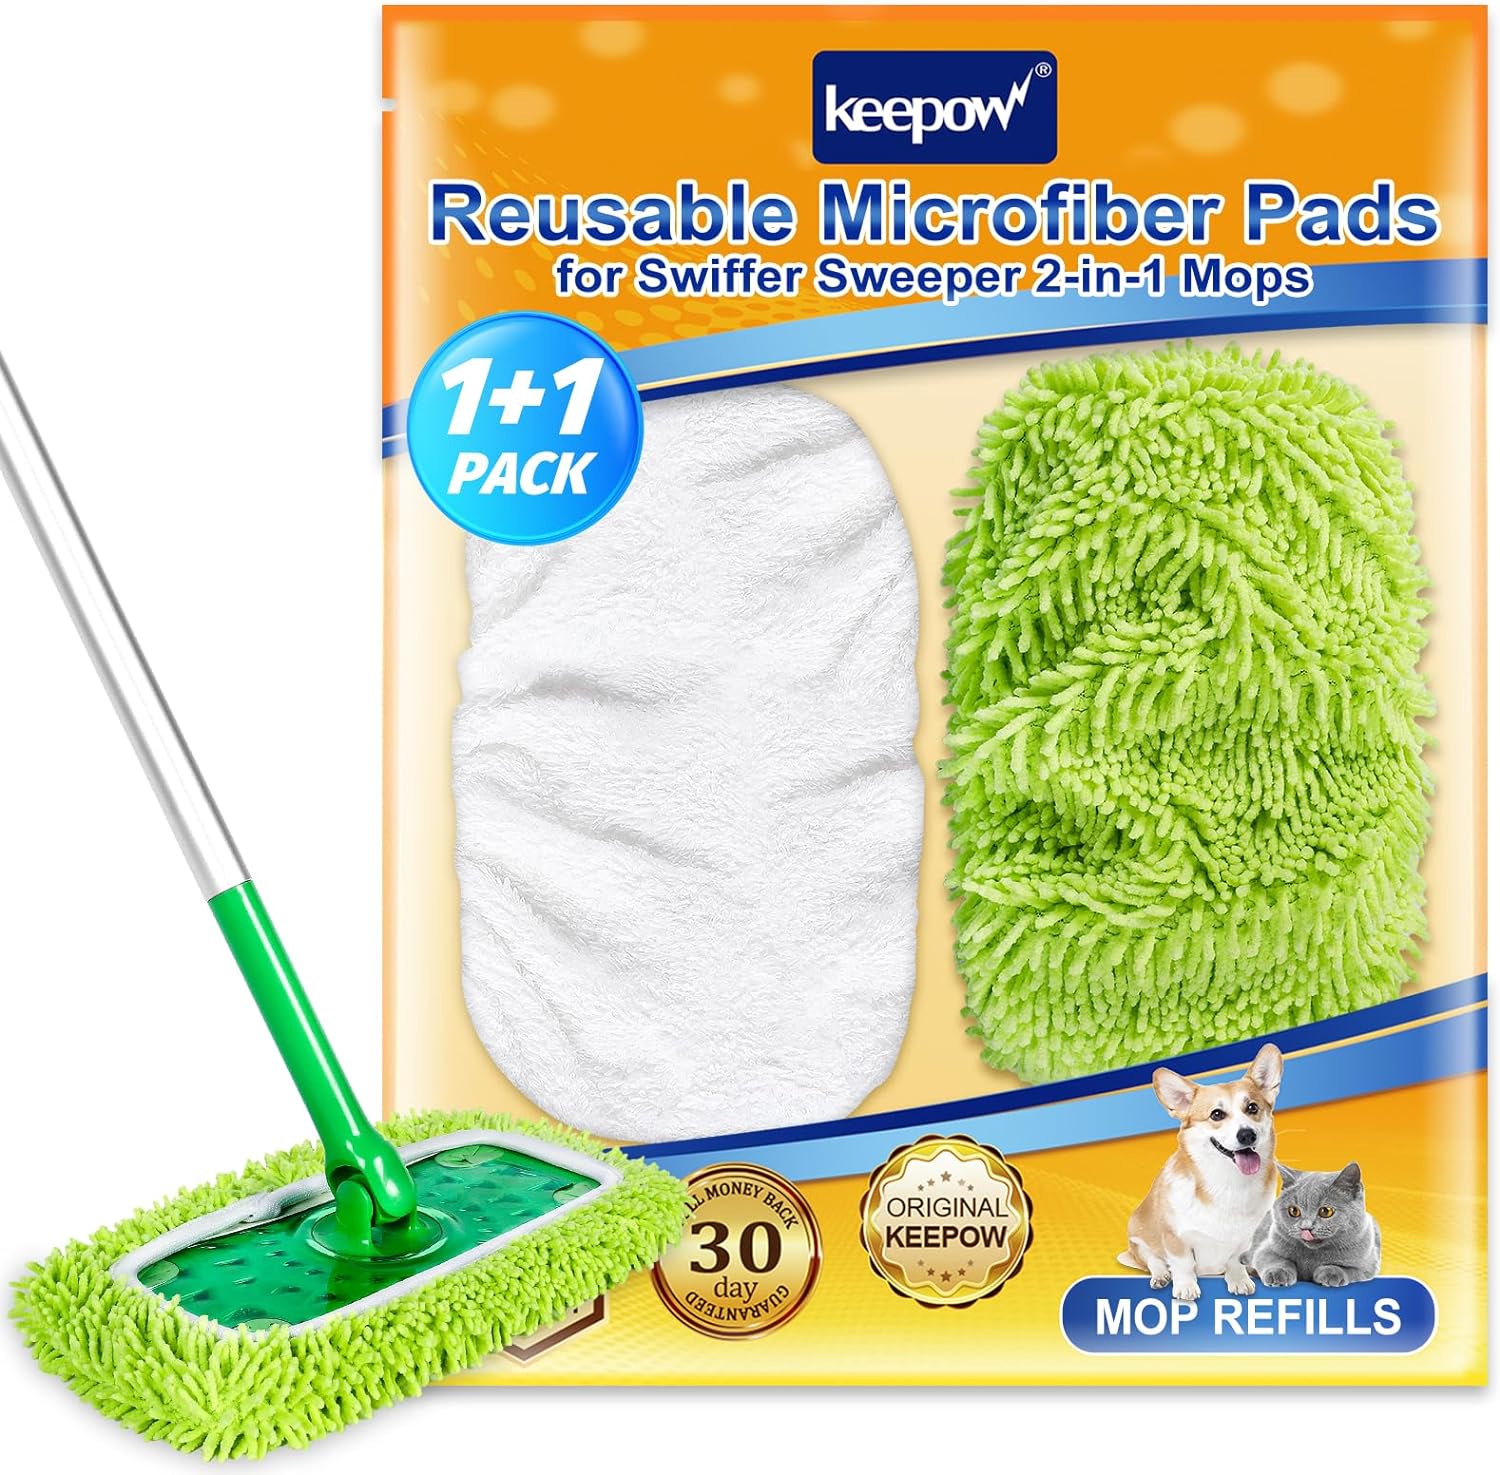 KEEPOW 5701M Reusable Wet Pads Refills Washable Microfiber Wet Mopping Cloths, 2 Pack (Mop is Not Included)